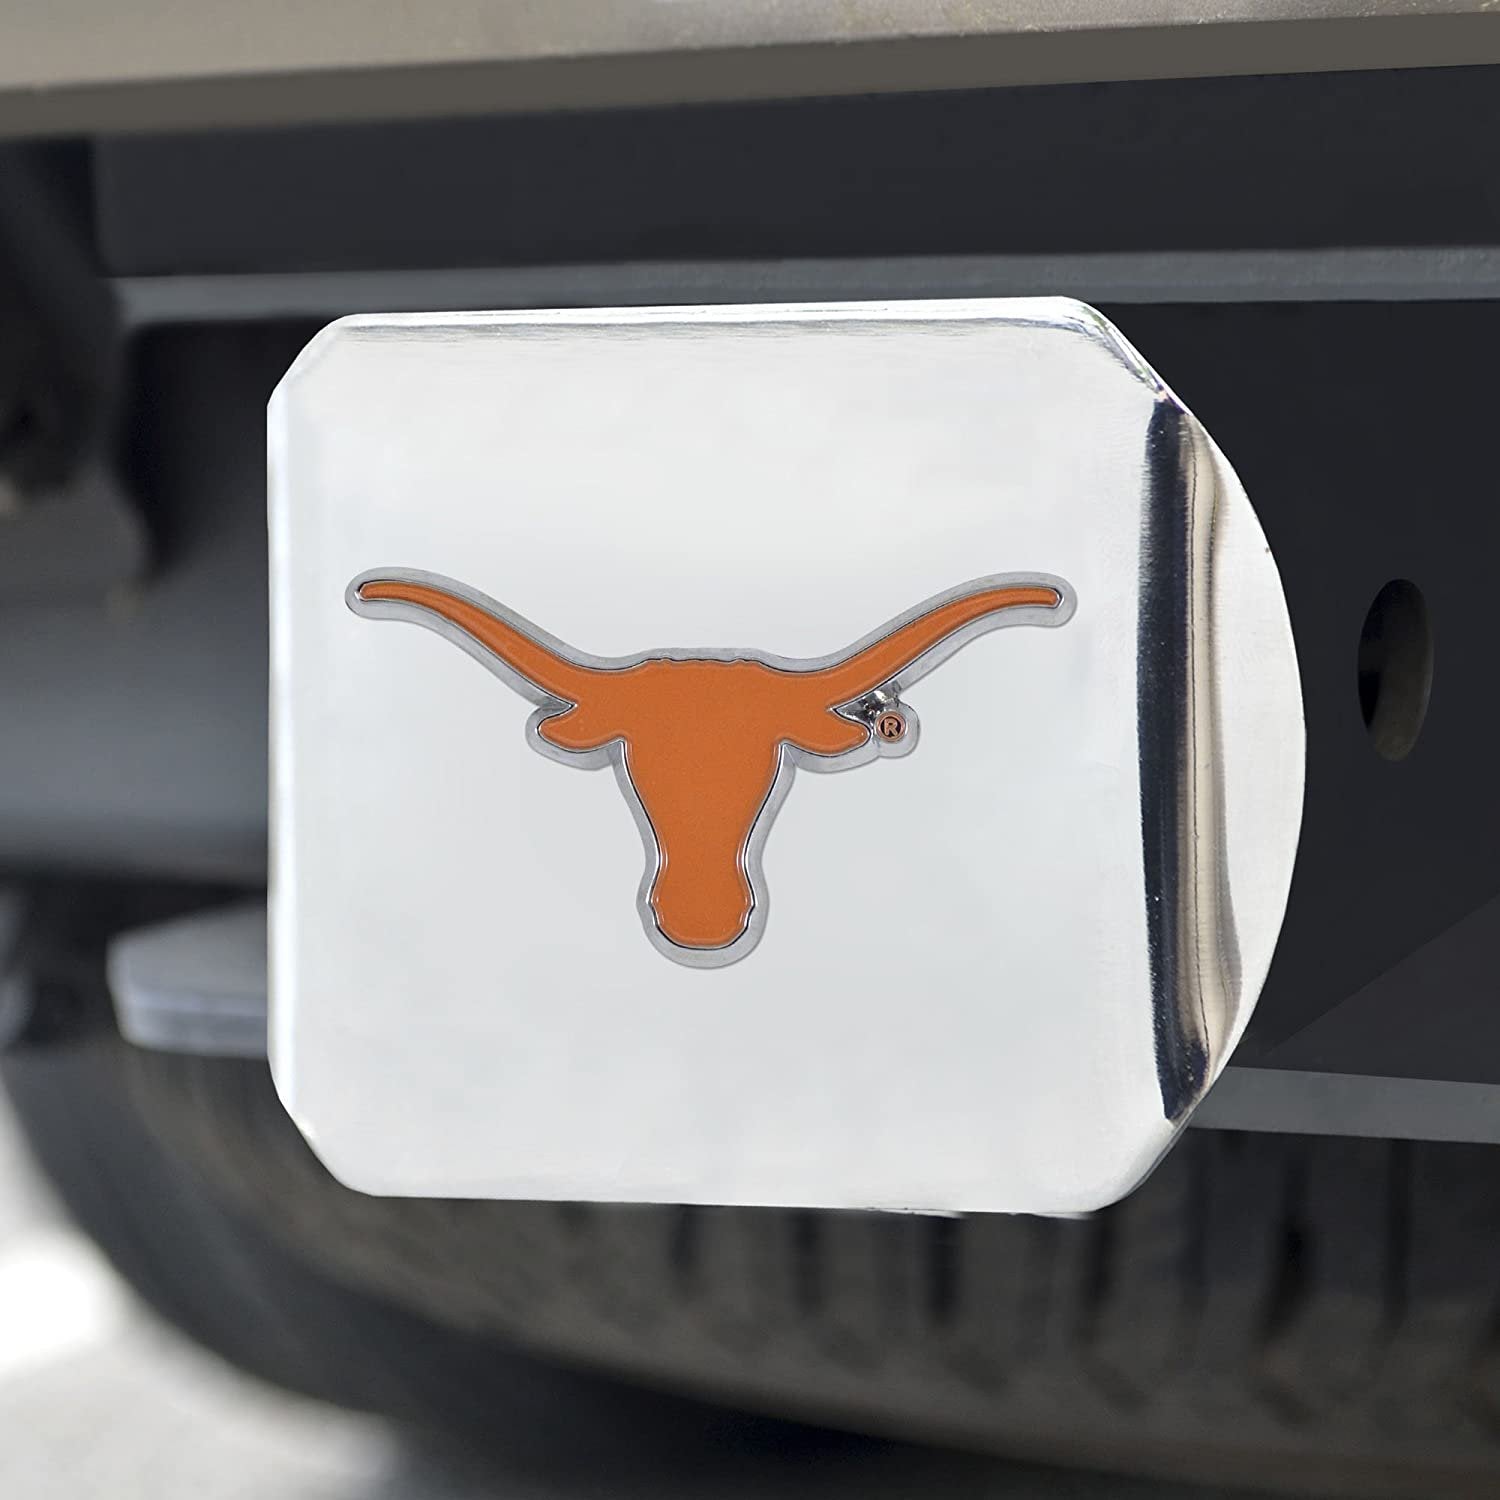 University of Texas Longhorns Hitch Cover Solid Metal with Raised Color Metal Emblem 2" Square Type III